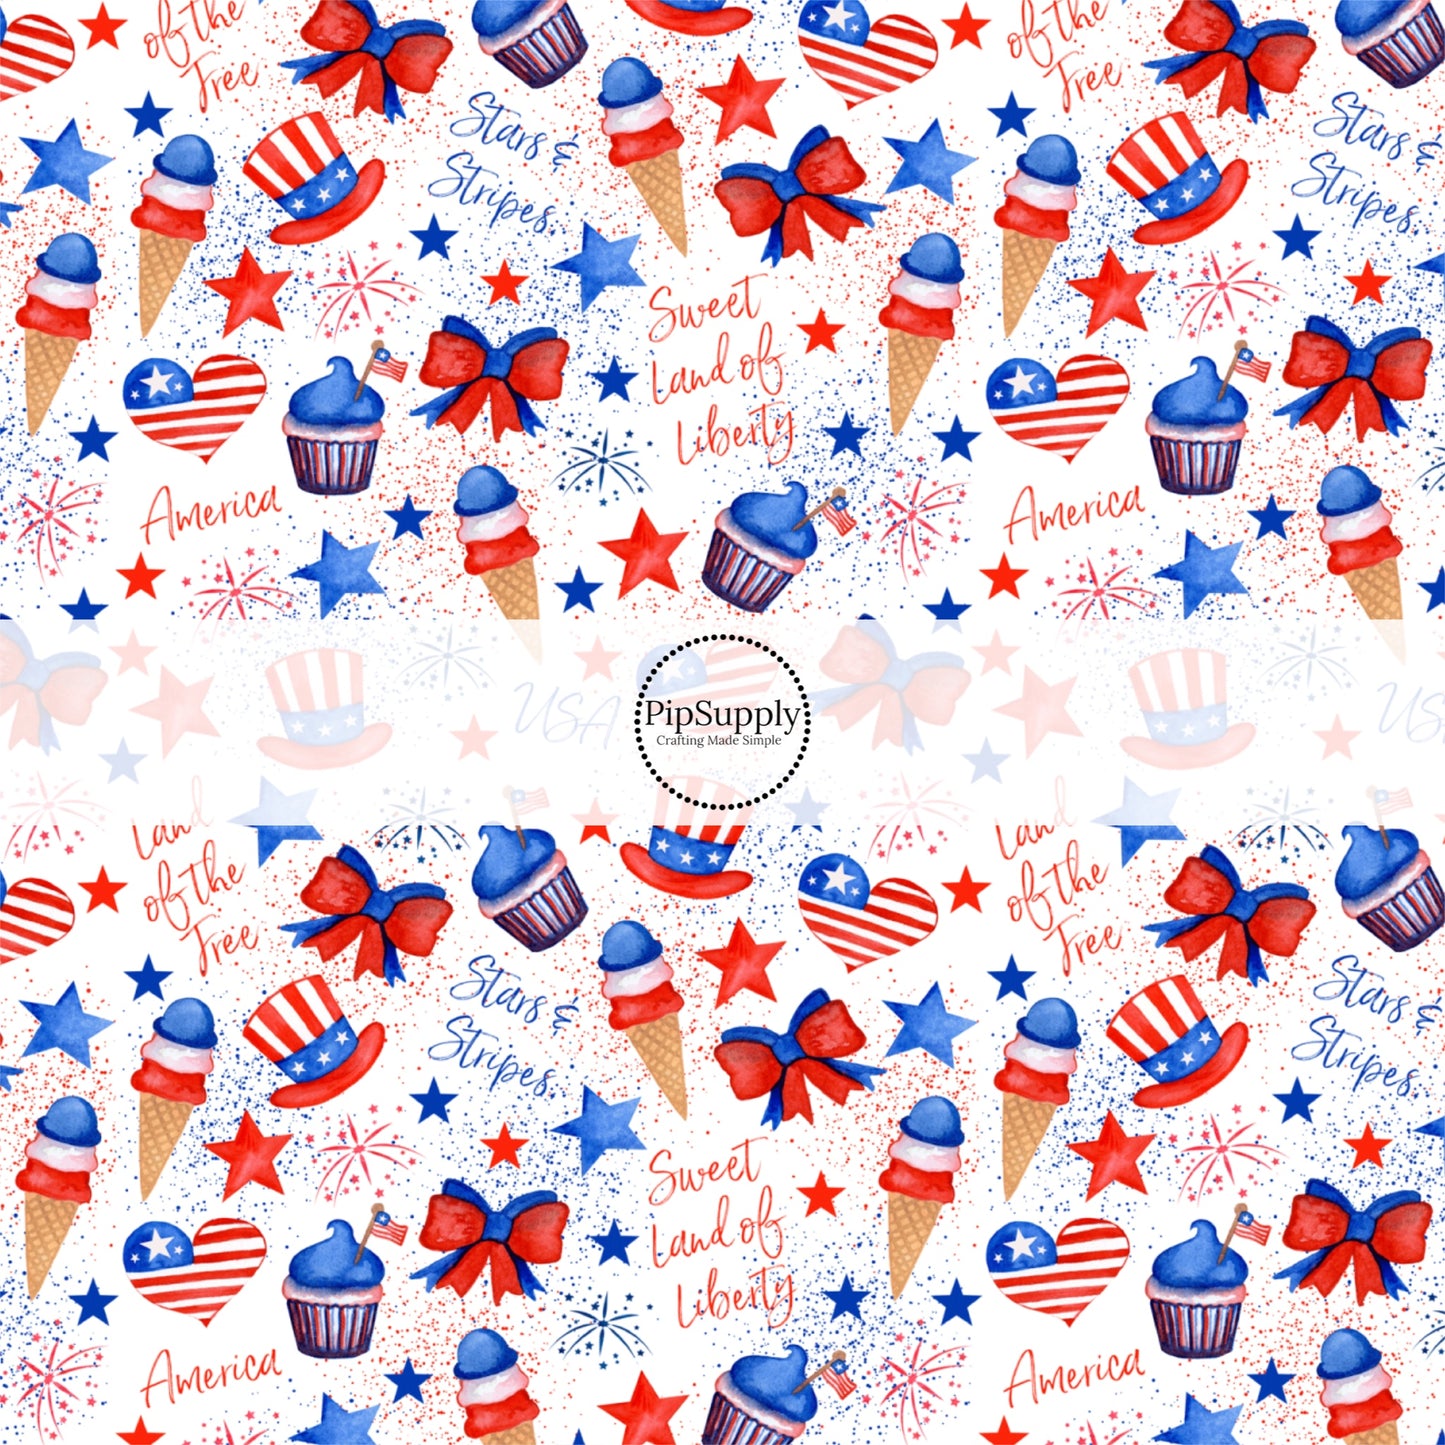 Patriotic sayings, red white and blue hats, ice, cream, bows, cupcakes, hearts, fireworks, and stars on white bow strips